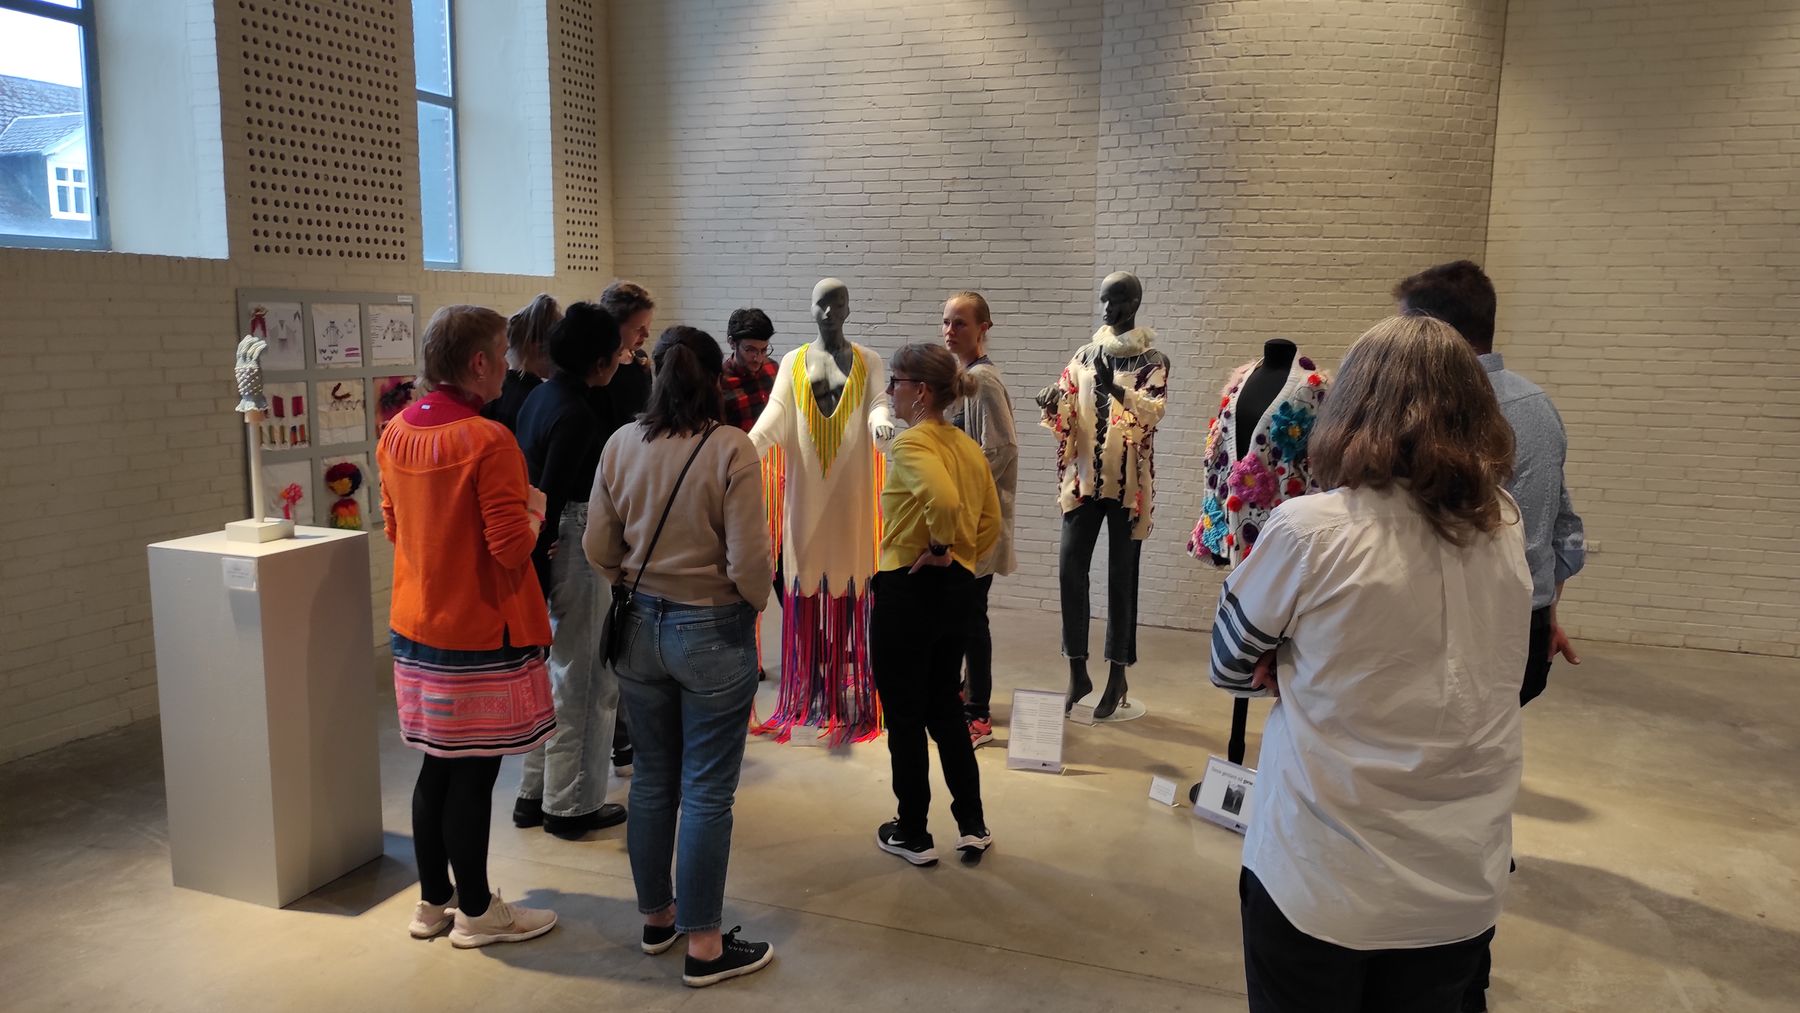 Visit to the Textile Museum of Herning. Photo by Aalto University, Giulnara Launonen